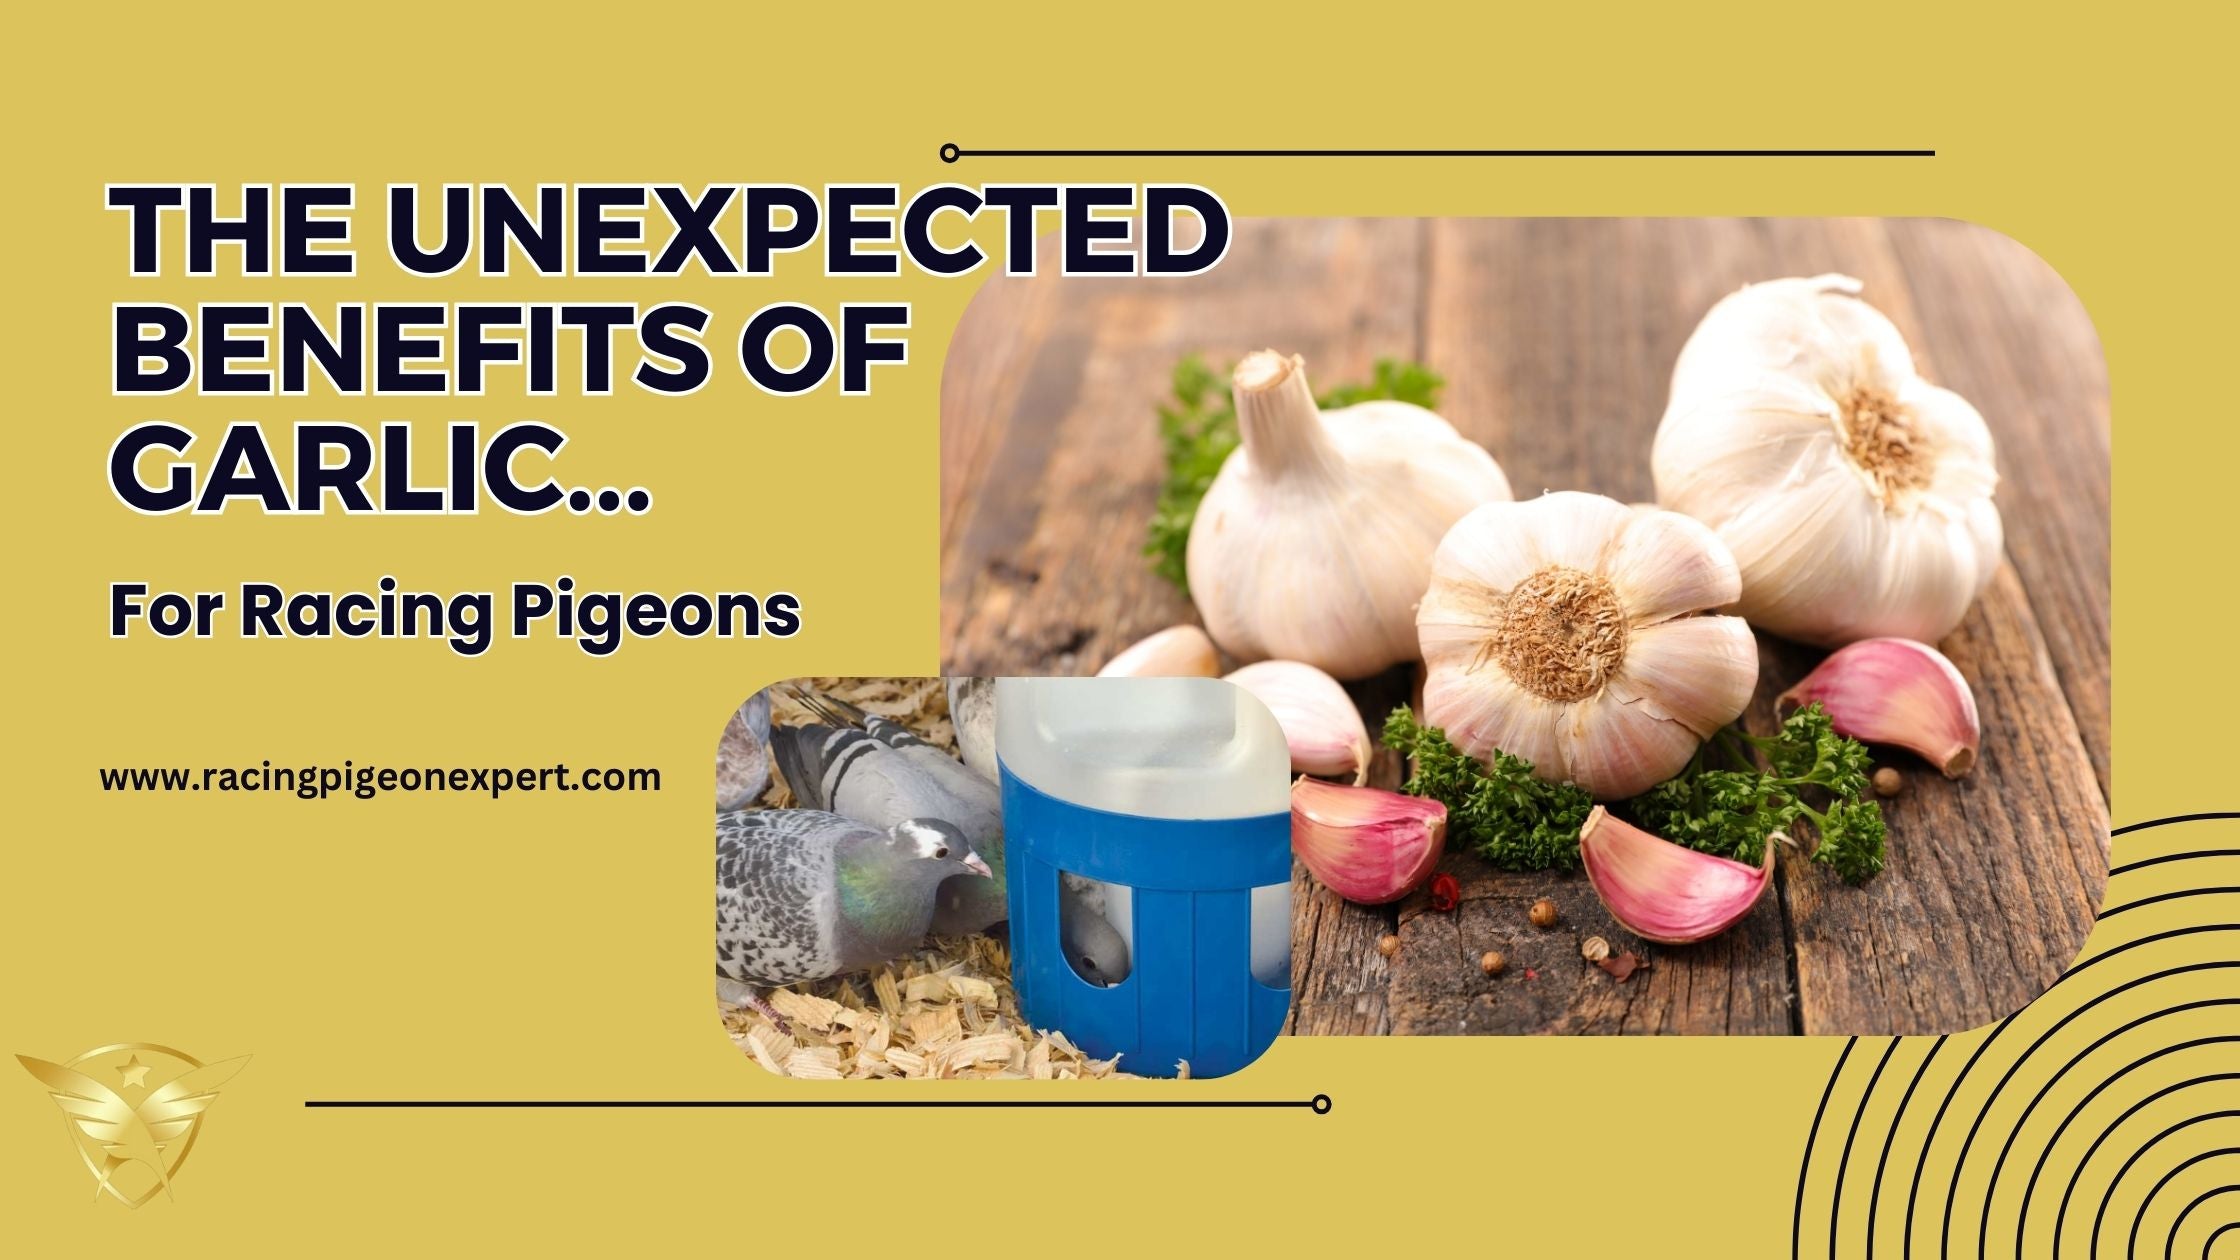 The Unexpected Benefits of Garlic for Racing Pigeons in Pigeon Sports